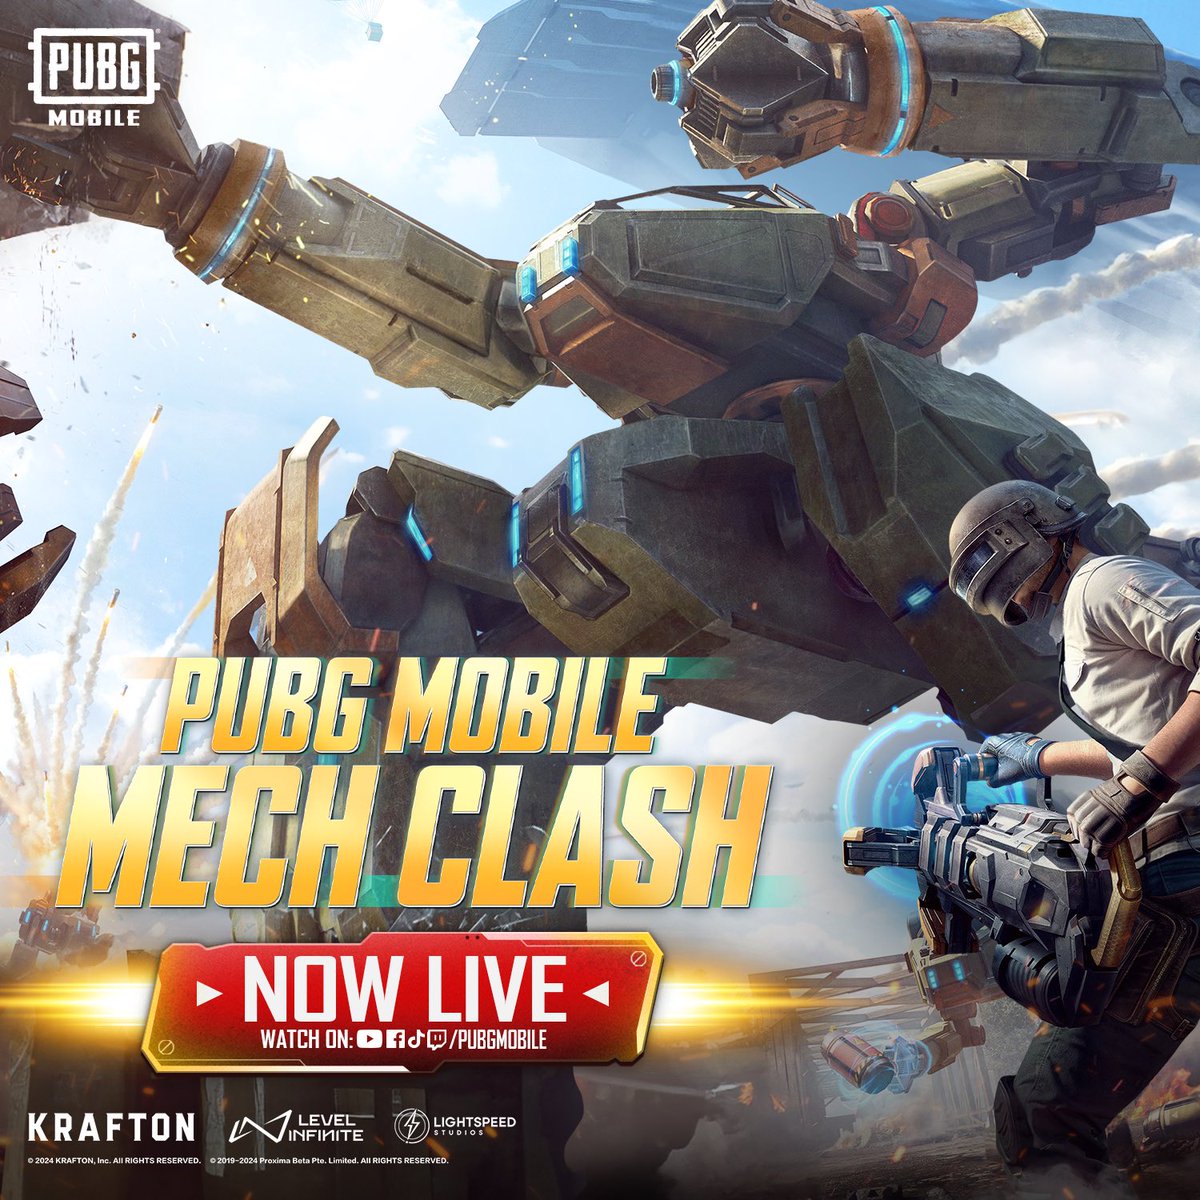 Did you know the #PUBGMOBILE Mech Clash event is NOW LIVE?
I am playing with Team Mecha Masters against #PUBGMVIP creators! You don't want to miss this!

🚨 pubgmobile.live/MechClashYT

#PUBGMOBILEV320
#PUBGMOBILEMECH
#PUBGMMECHCLASH
#PUBGMOBILEC6S18
#ad